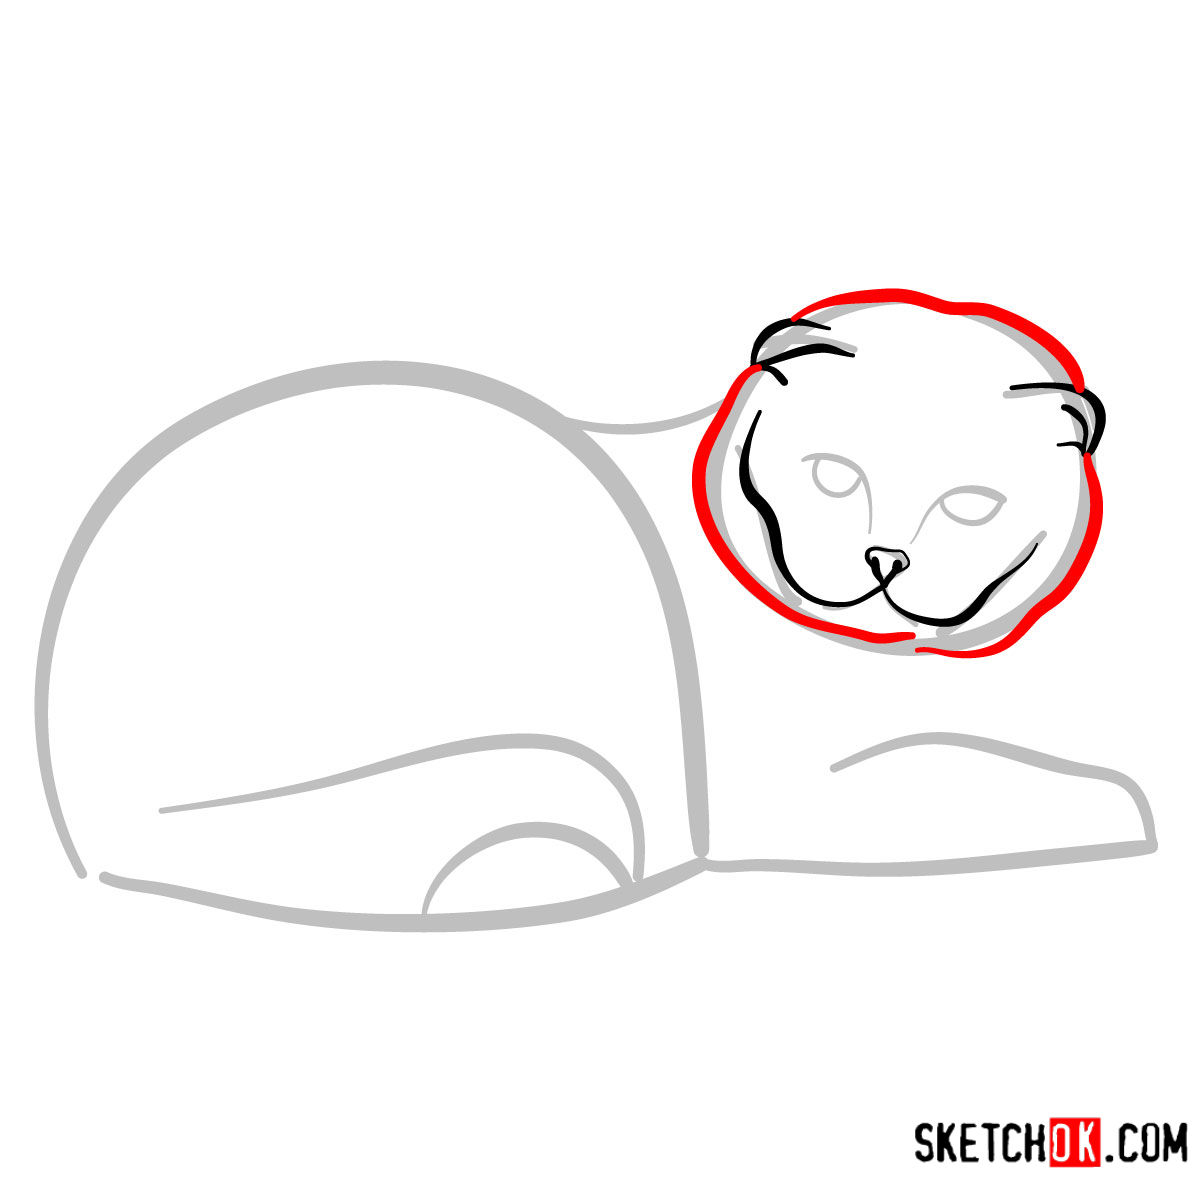 How to draw the Scottish Fold cat - step 04